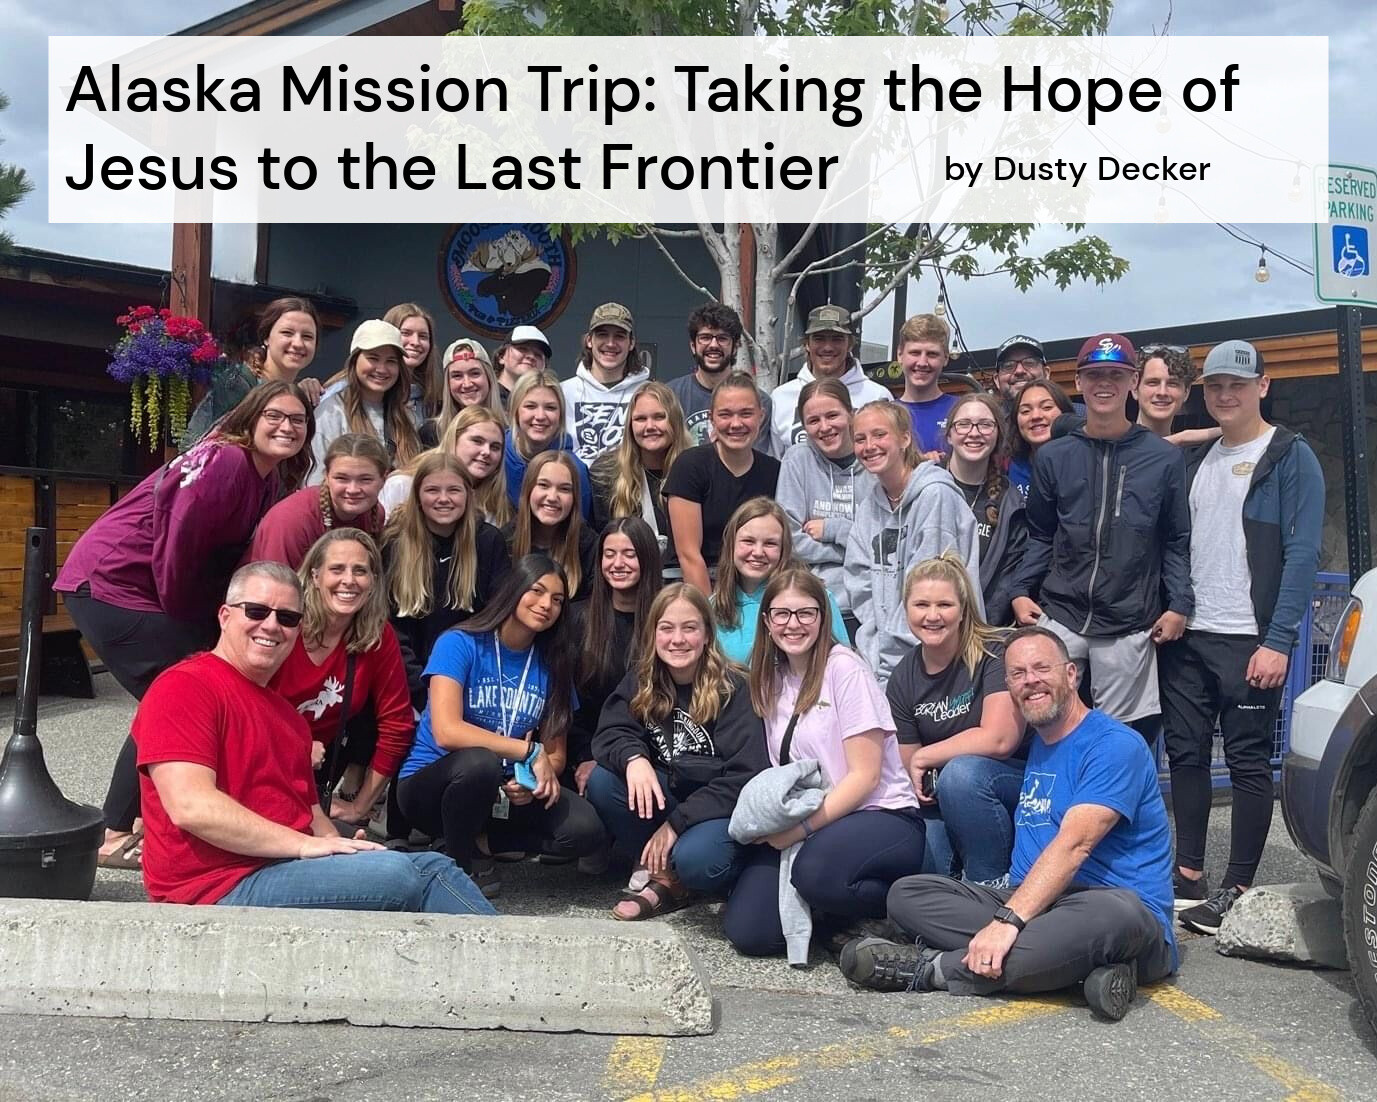 Alaska-Mission-Trip-Taking-the-Hope-of-Jesus-to-the-Last-Frontier